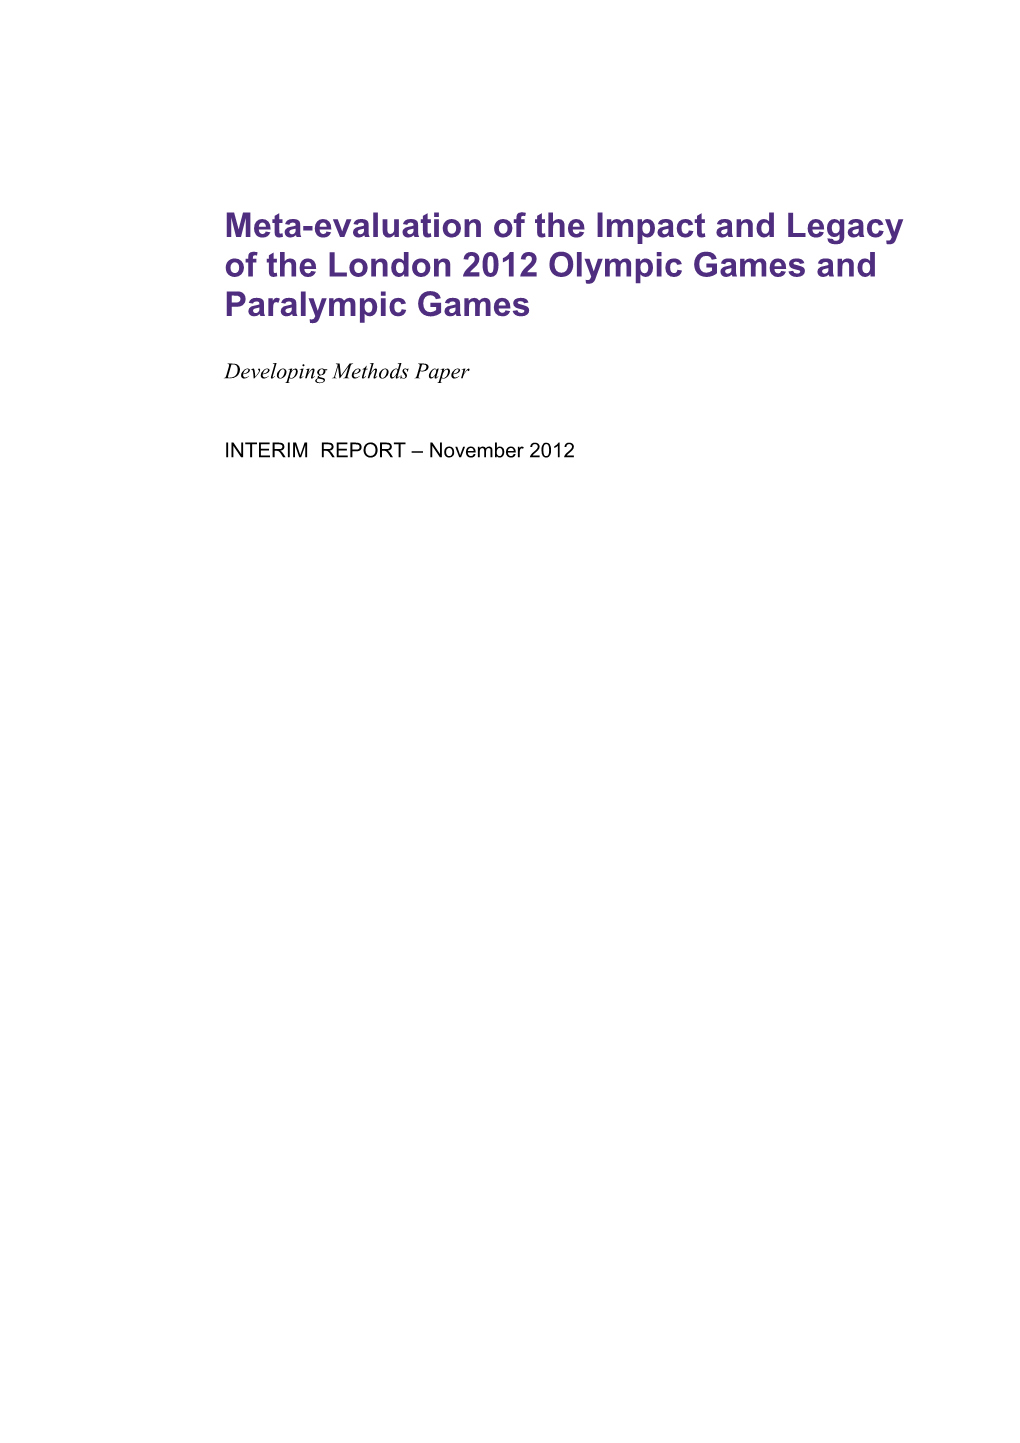 Meta-Evaluation of the Impact and Legacy of the London 2012 Olympic Games and Paralympic Games